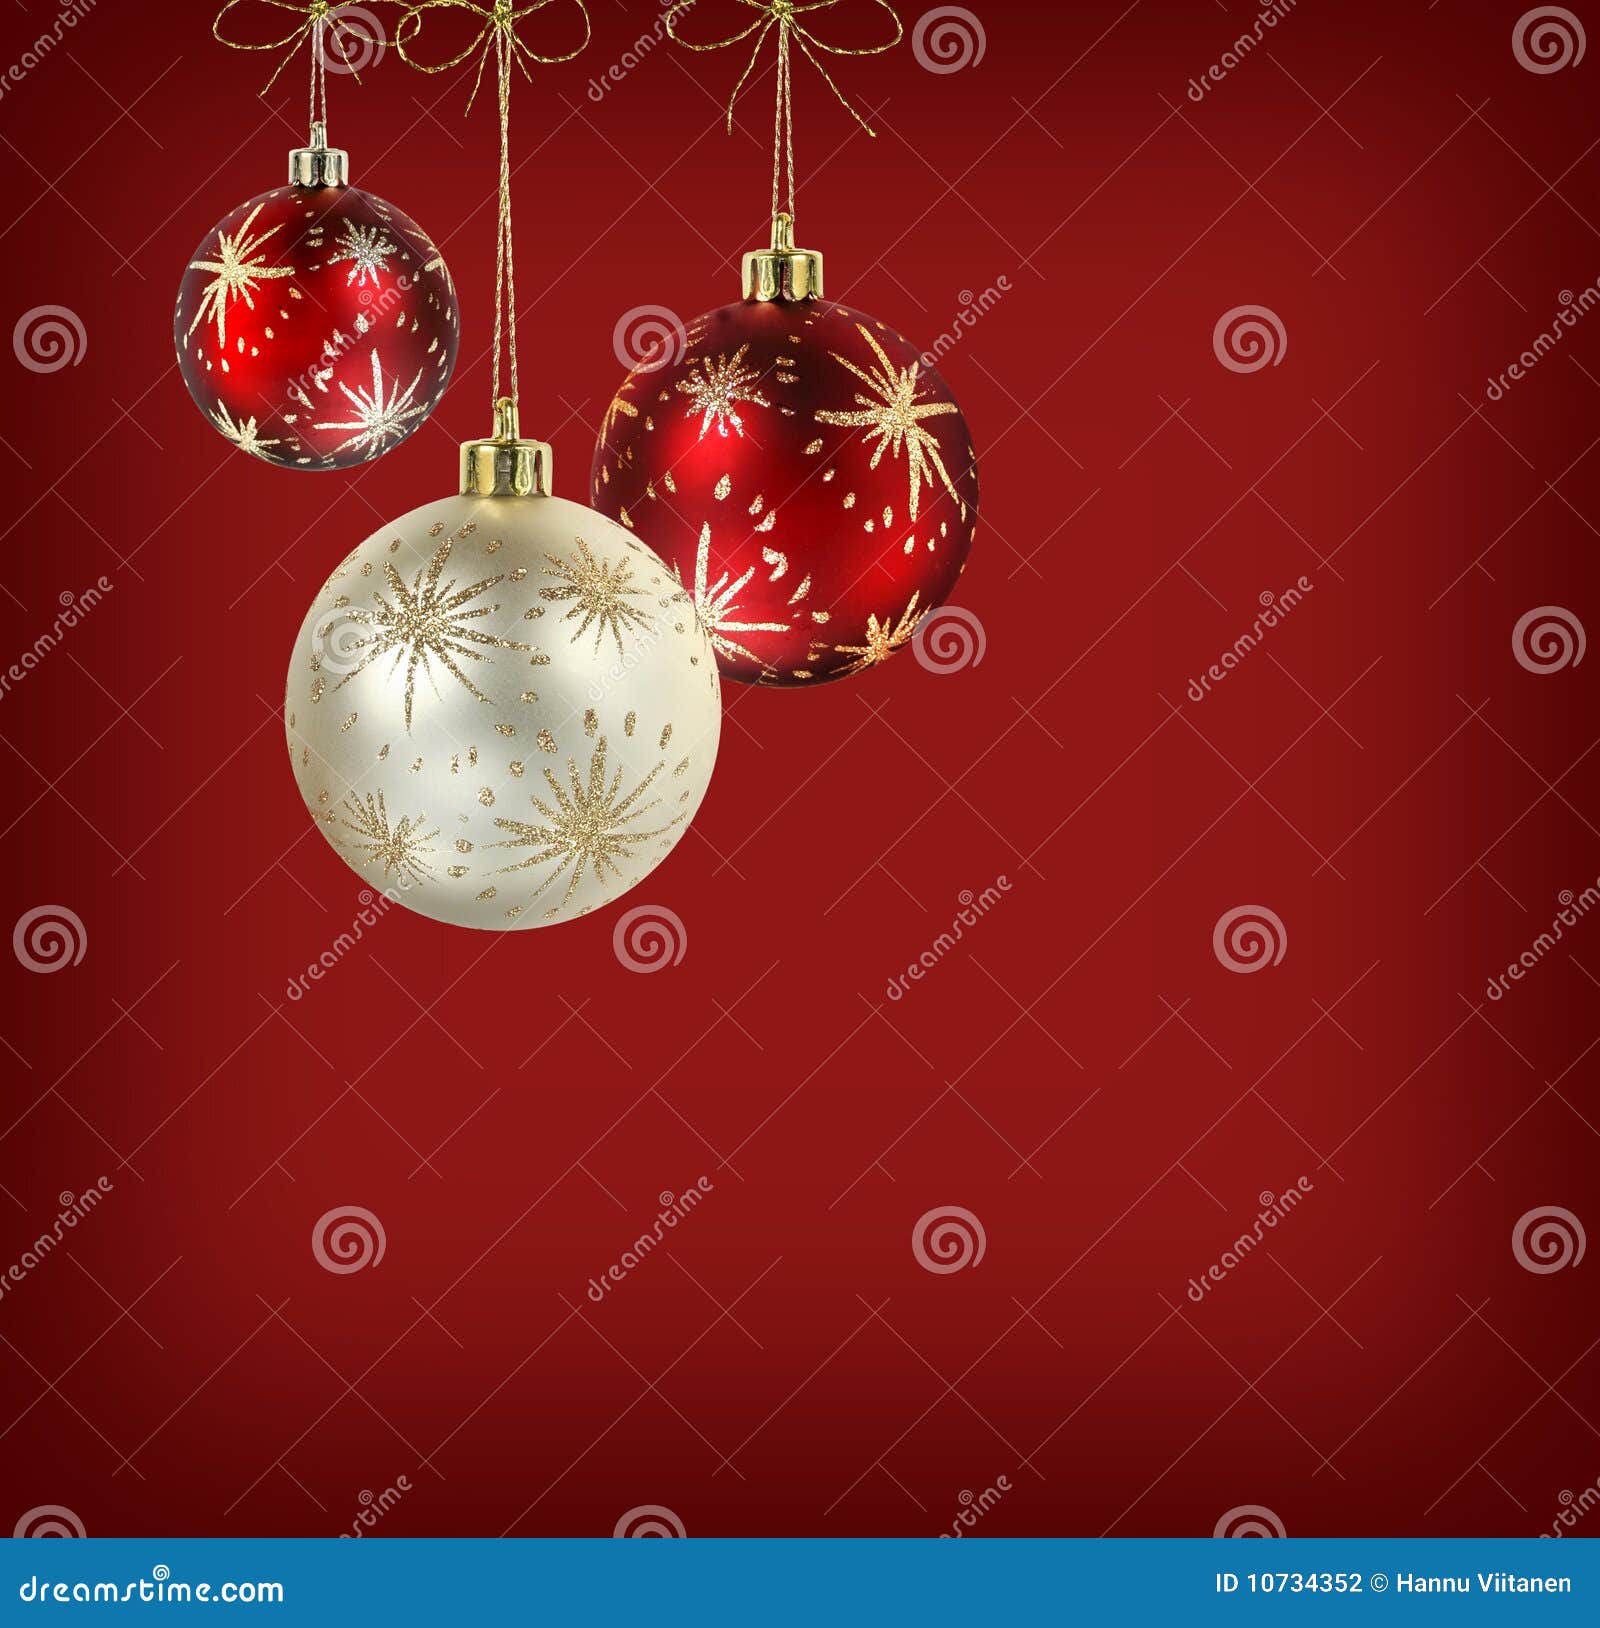 Satin Red and White Christmas Balls Stock Photo - Image of decorating ...